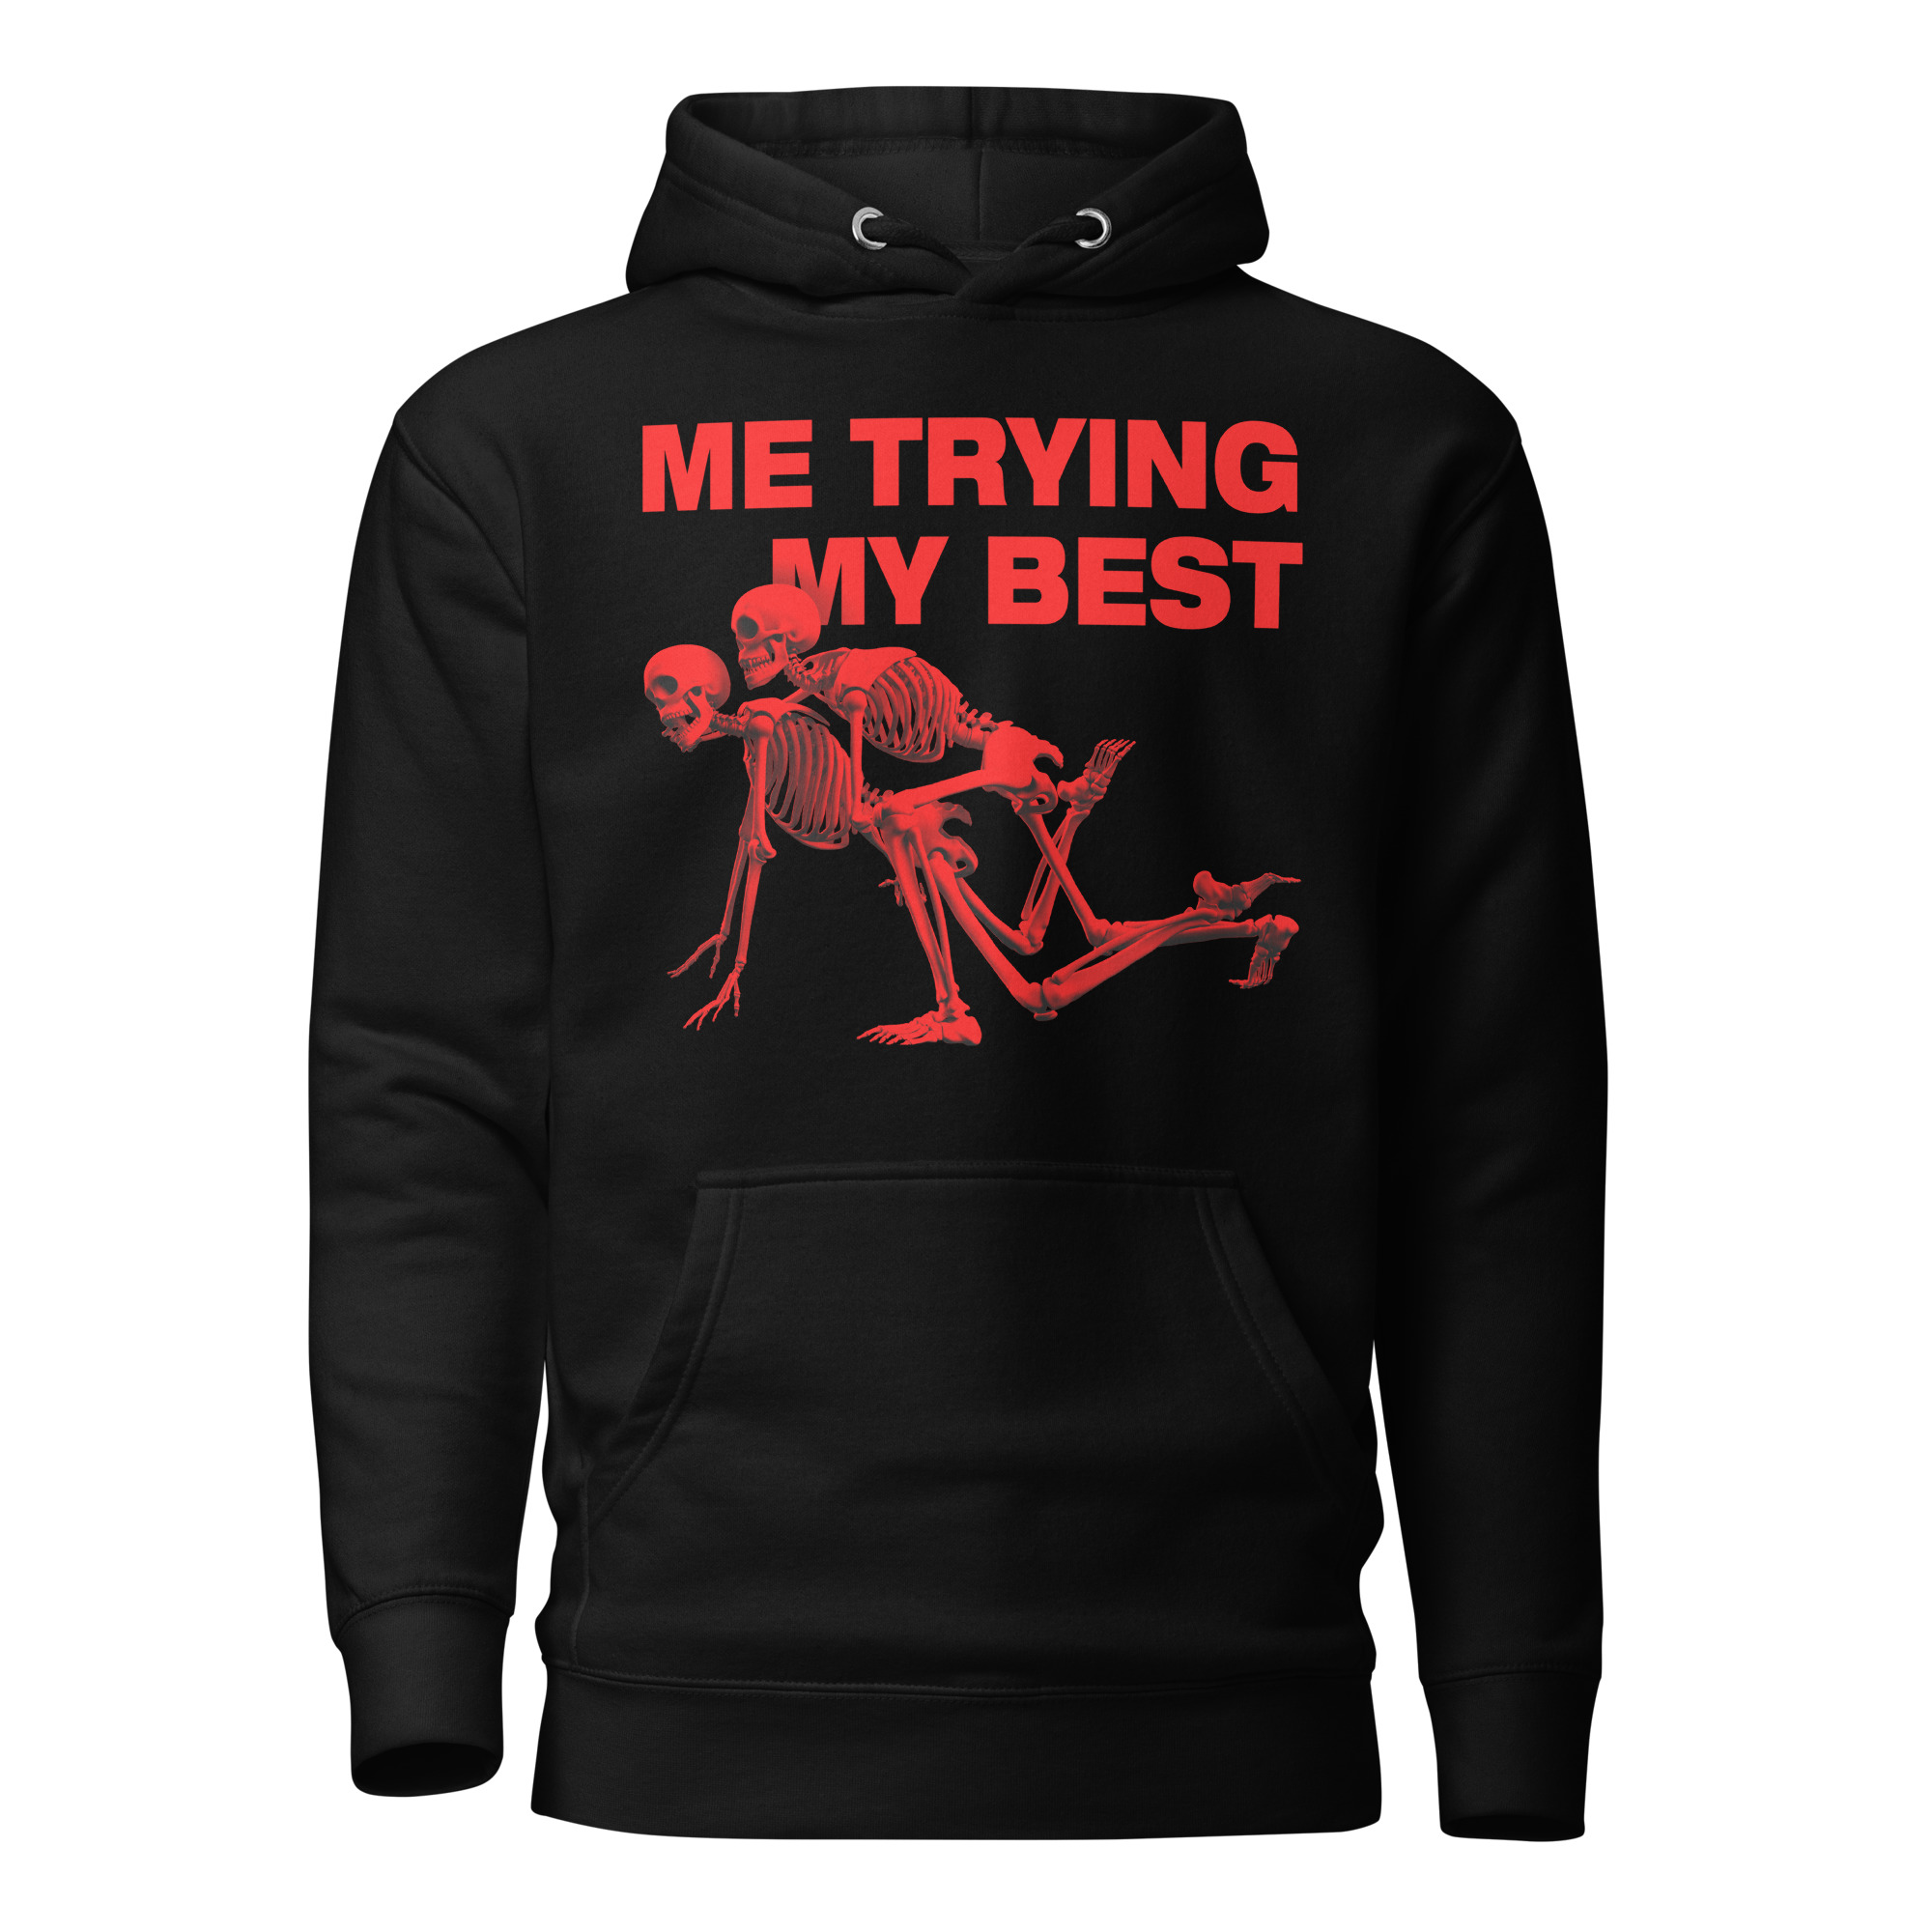 Featured image for “Me Trying My Best - Unisex Premium Hoodie”